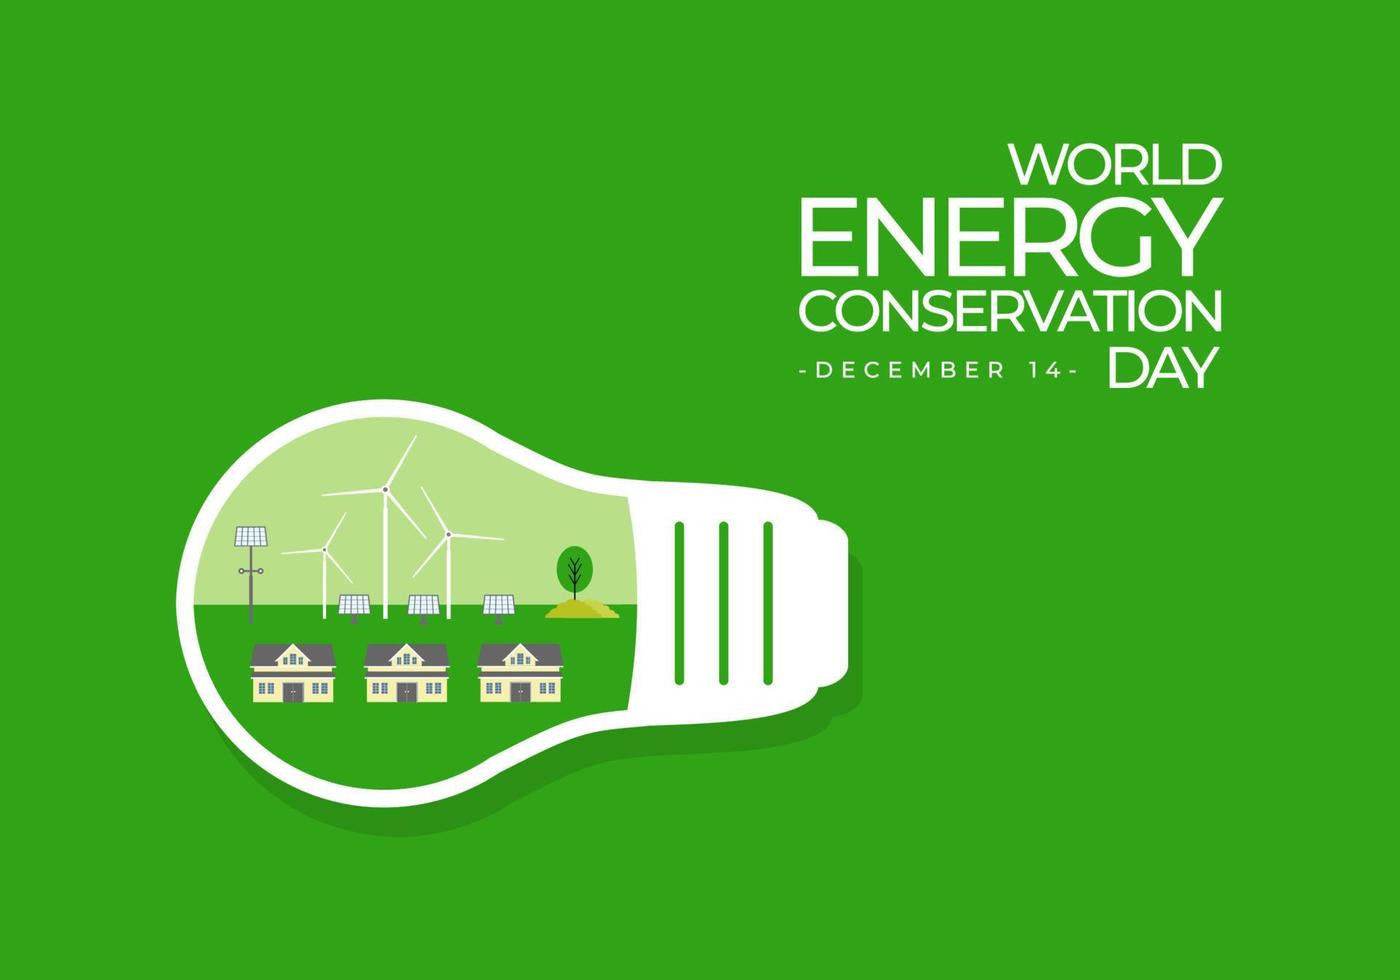 National energy conservation day background celebrated on december 14. vector